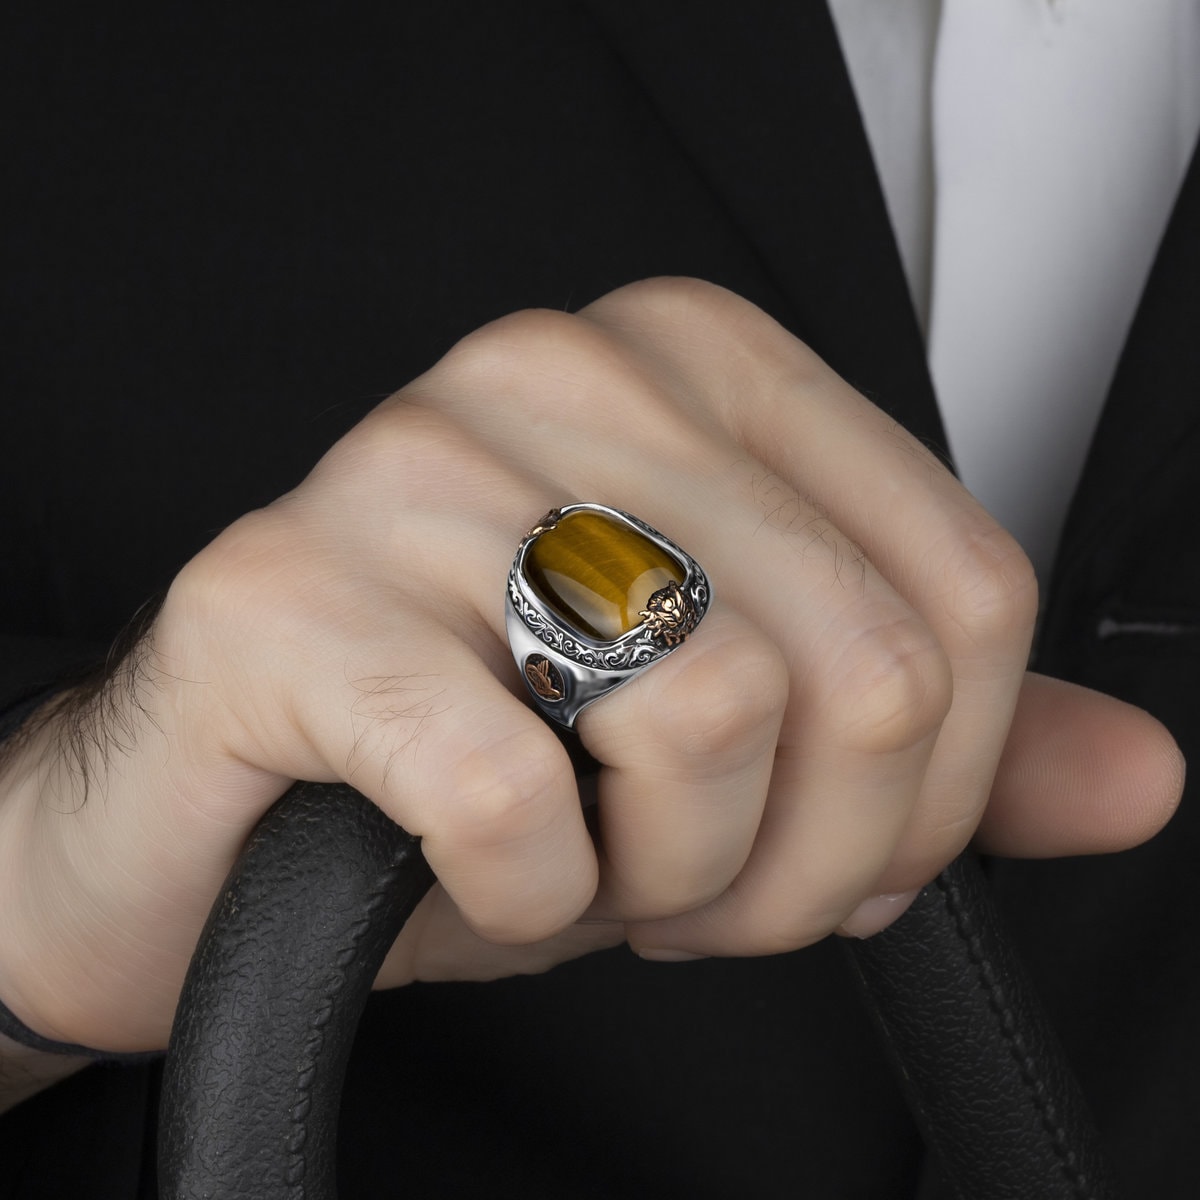 Men's silver ring with Ottoman tiger eye stone